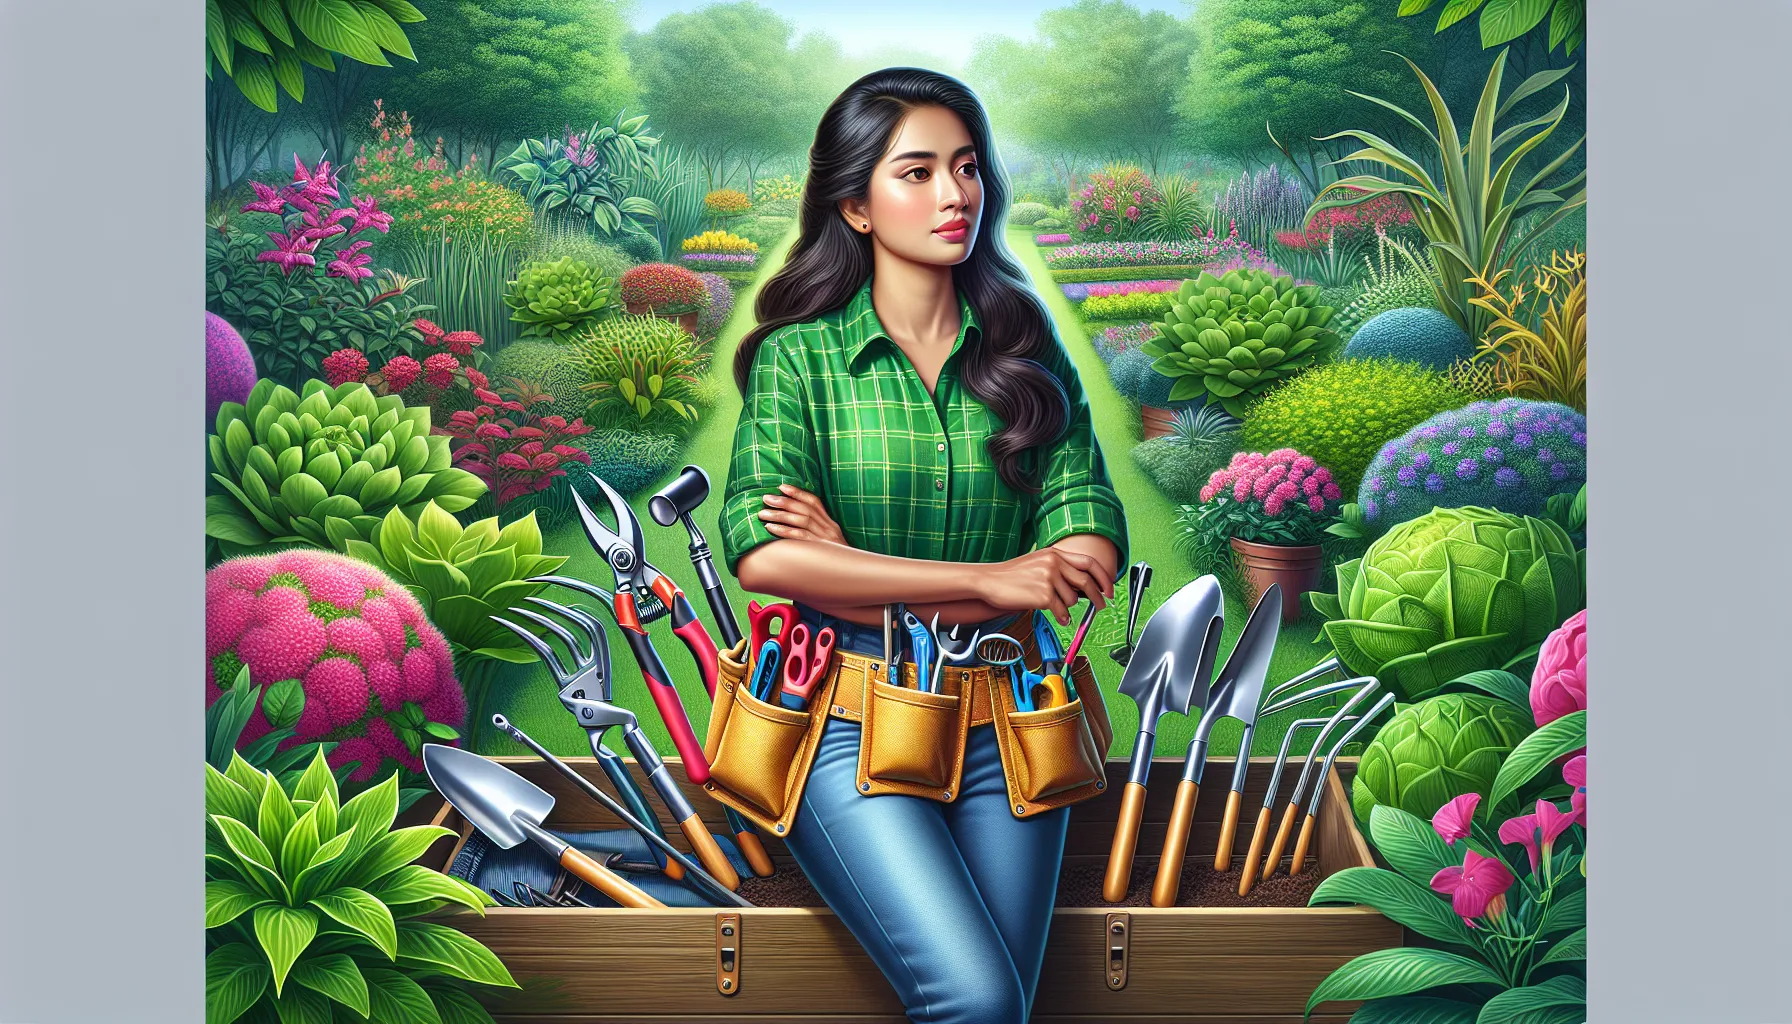 A woman in a green checked shirt stands with crossed arms wearing a tool belt for gardening, with an open toolbox and a lush garden in the background.